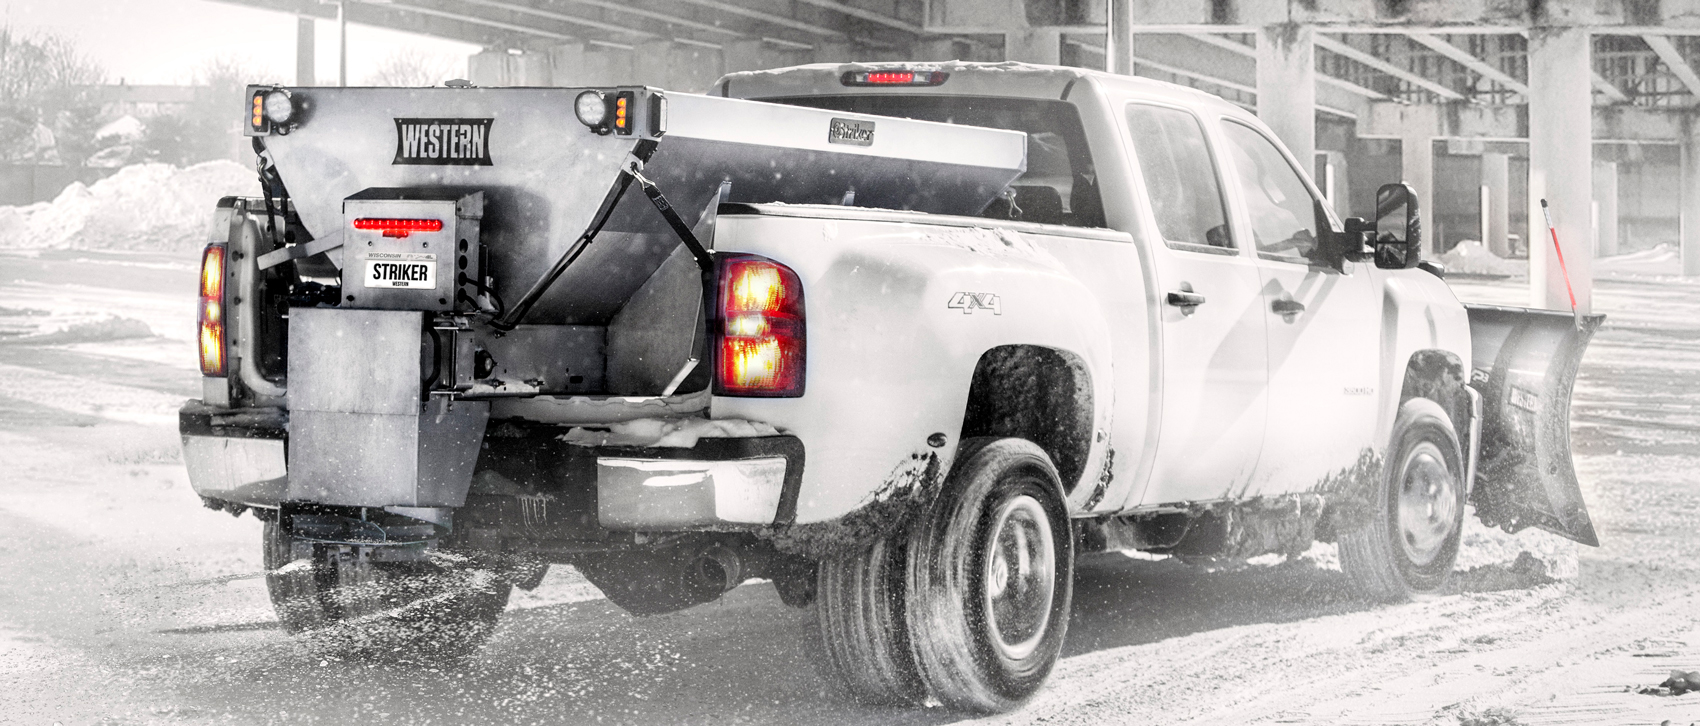 Stainless steel Western Striker for truck beds has up to 6.0 cu yd capacity to take your de-icing operation further